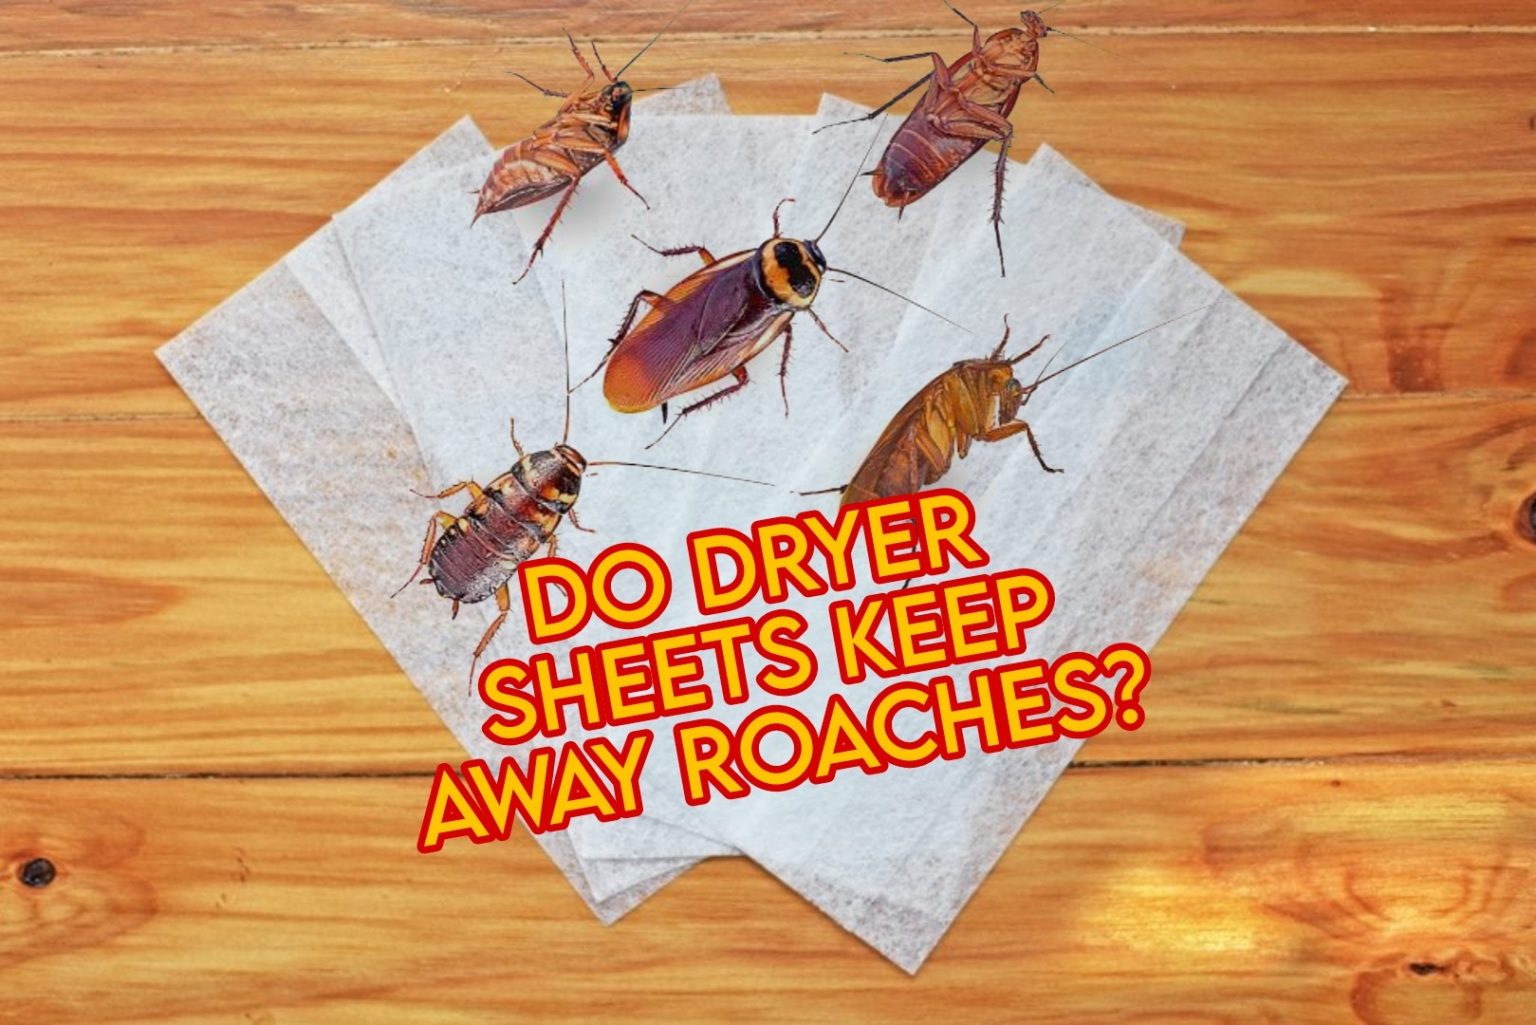 Do Dryer Sheets Keep Roaches Away or Kill Them?